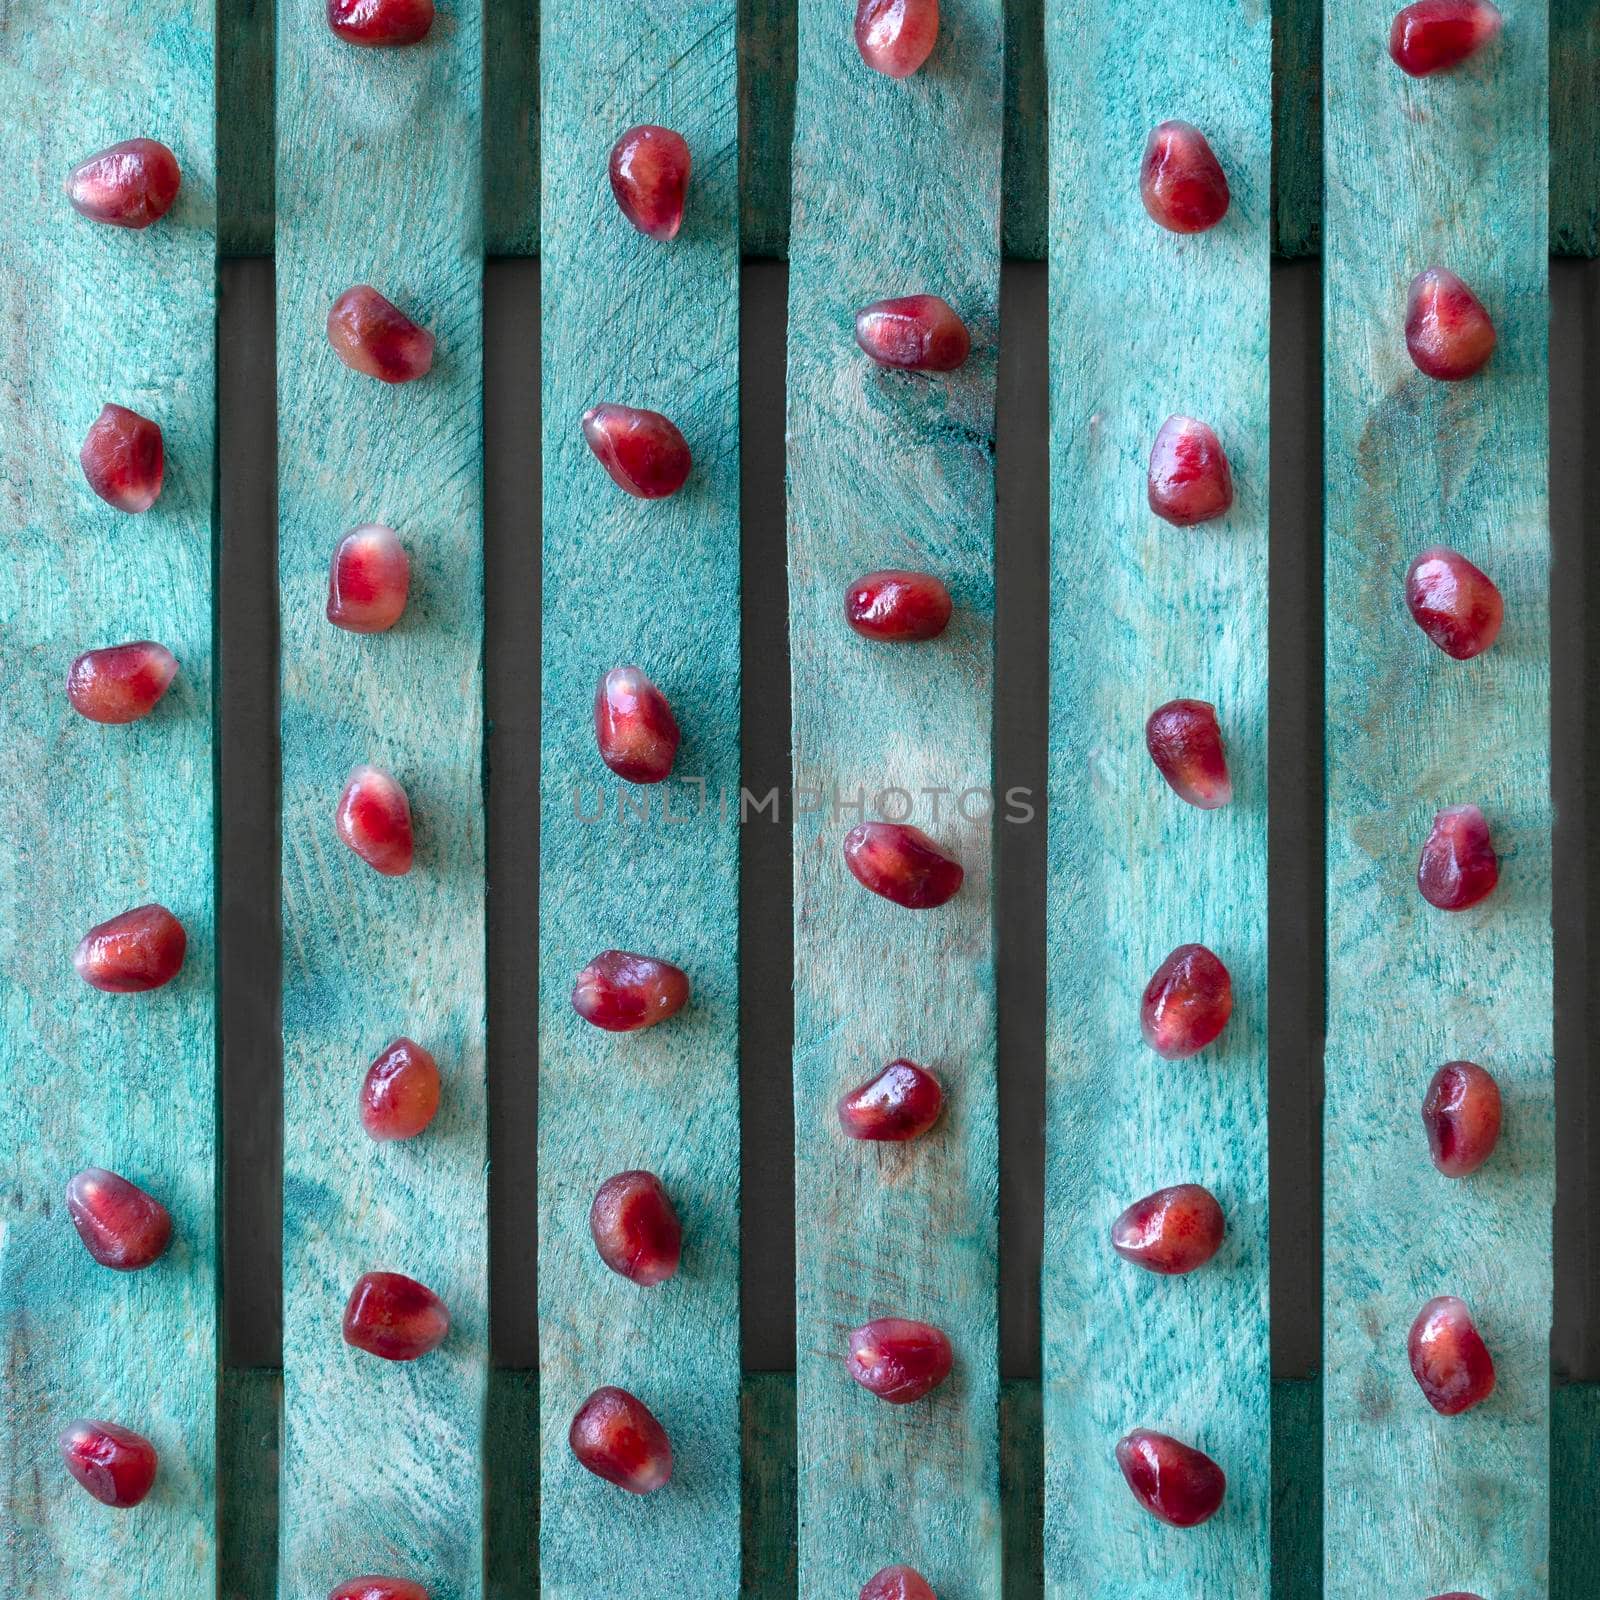 Seamless textured background. Red pomegranate seeds on a turquoise board. by Laguna781